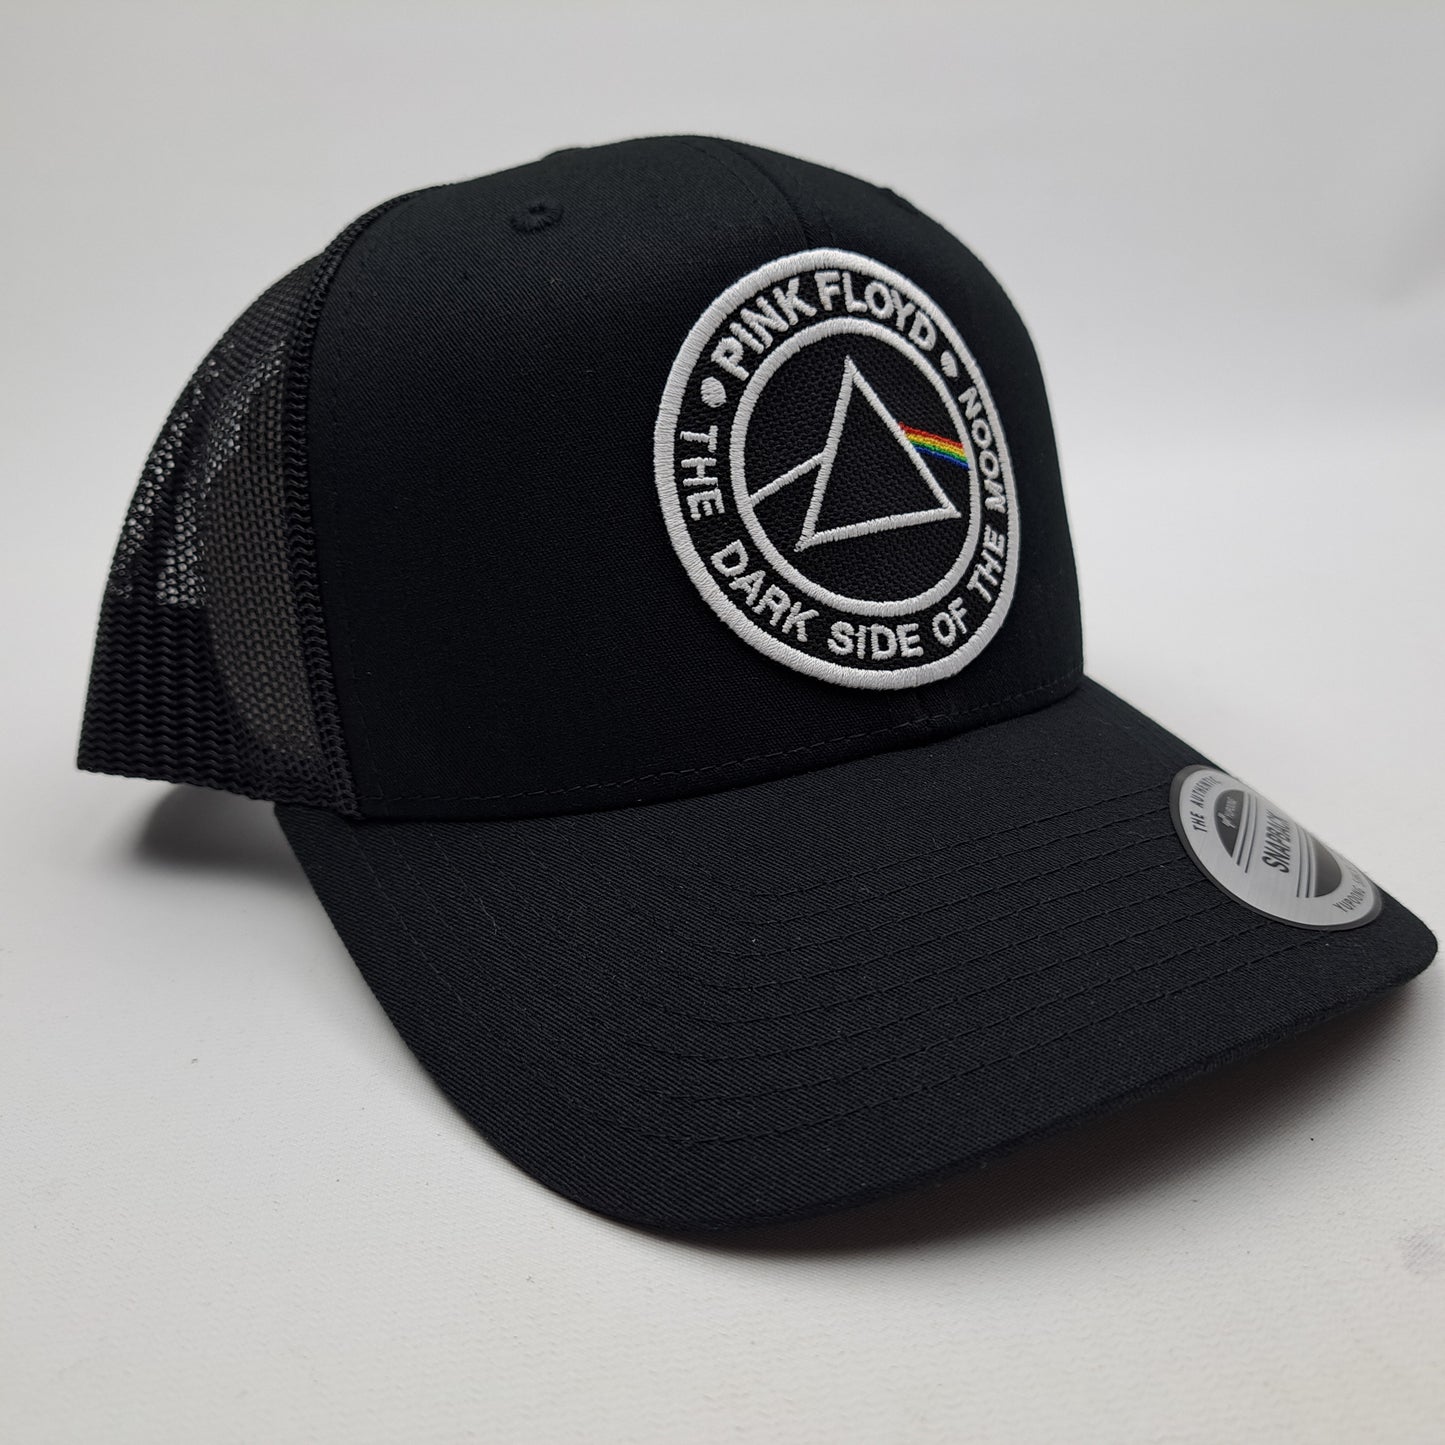 Pink Floyd Embroidered patch curved bill embroidered mesh snapback cap hat black